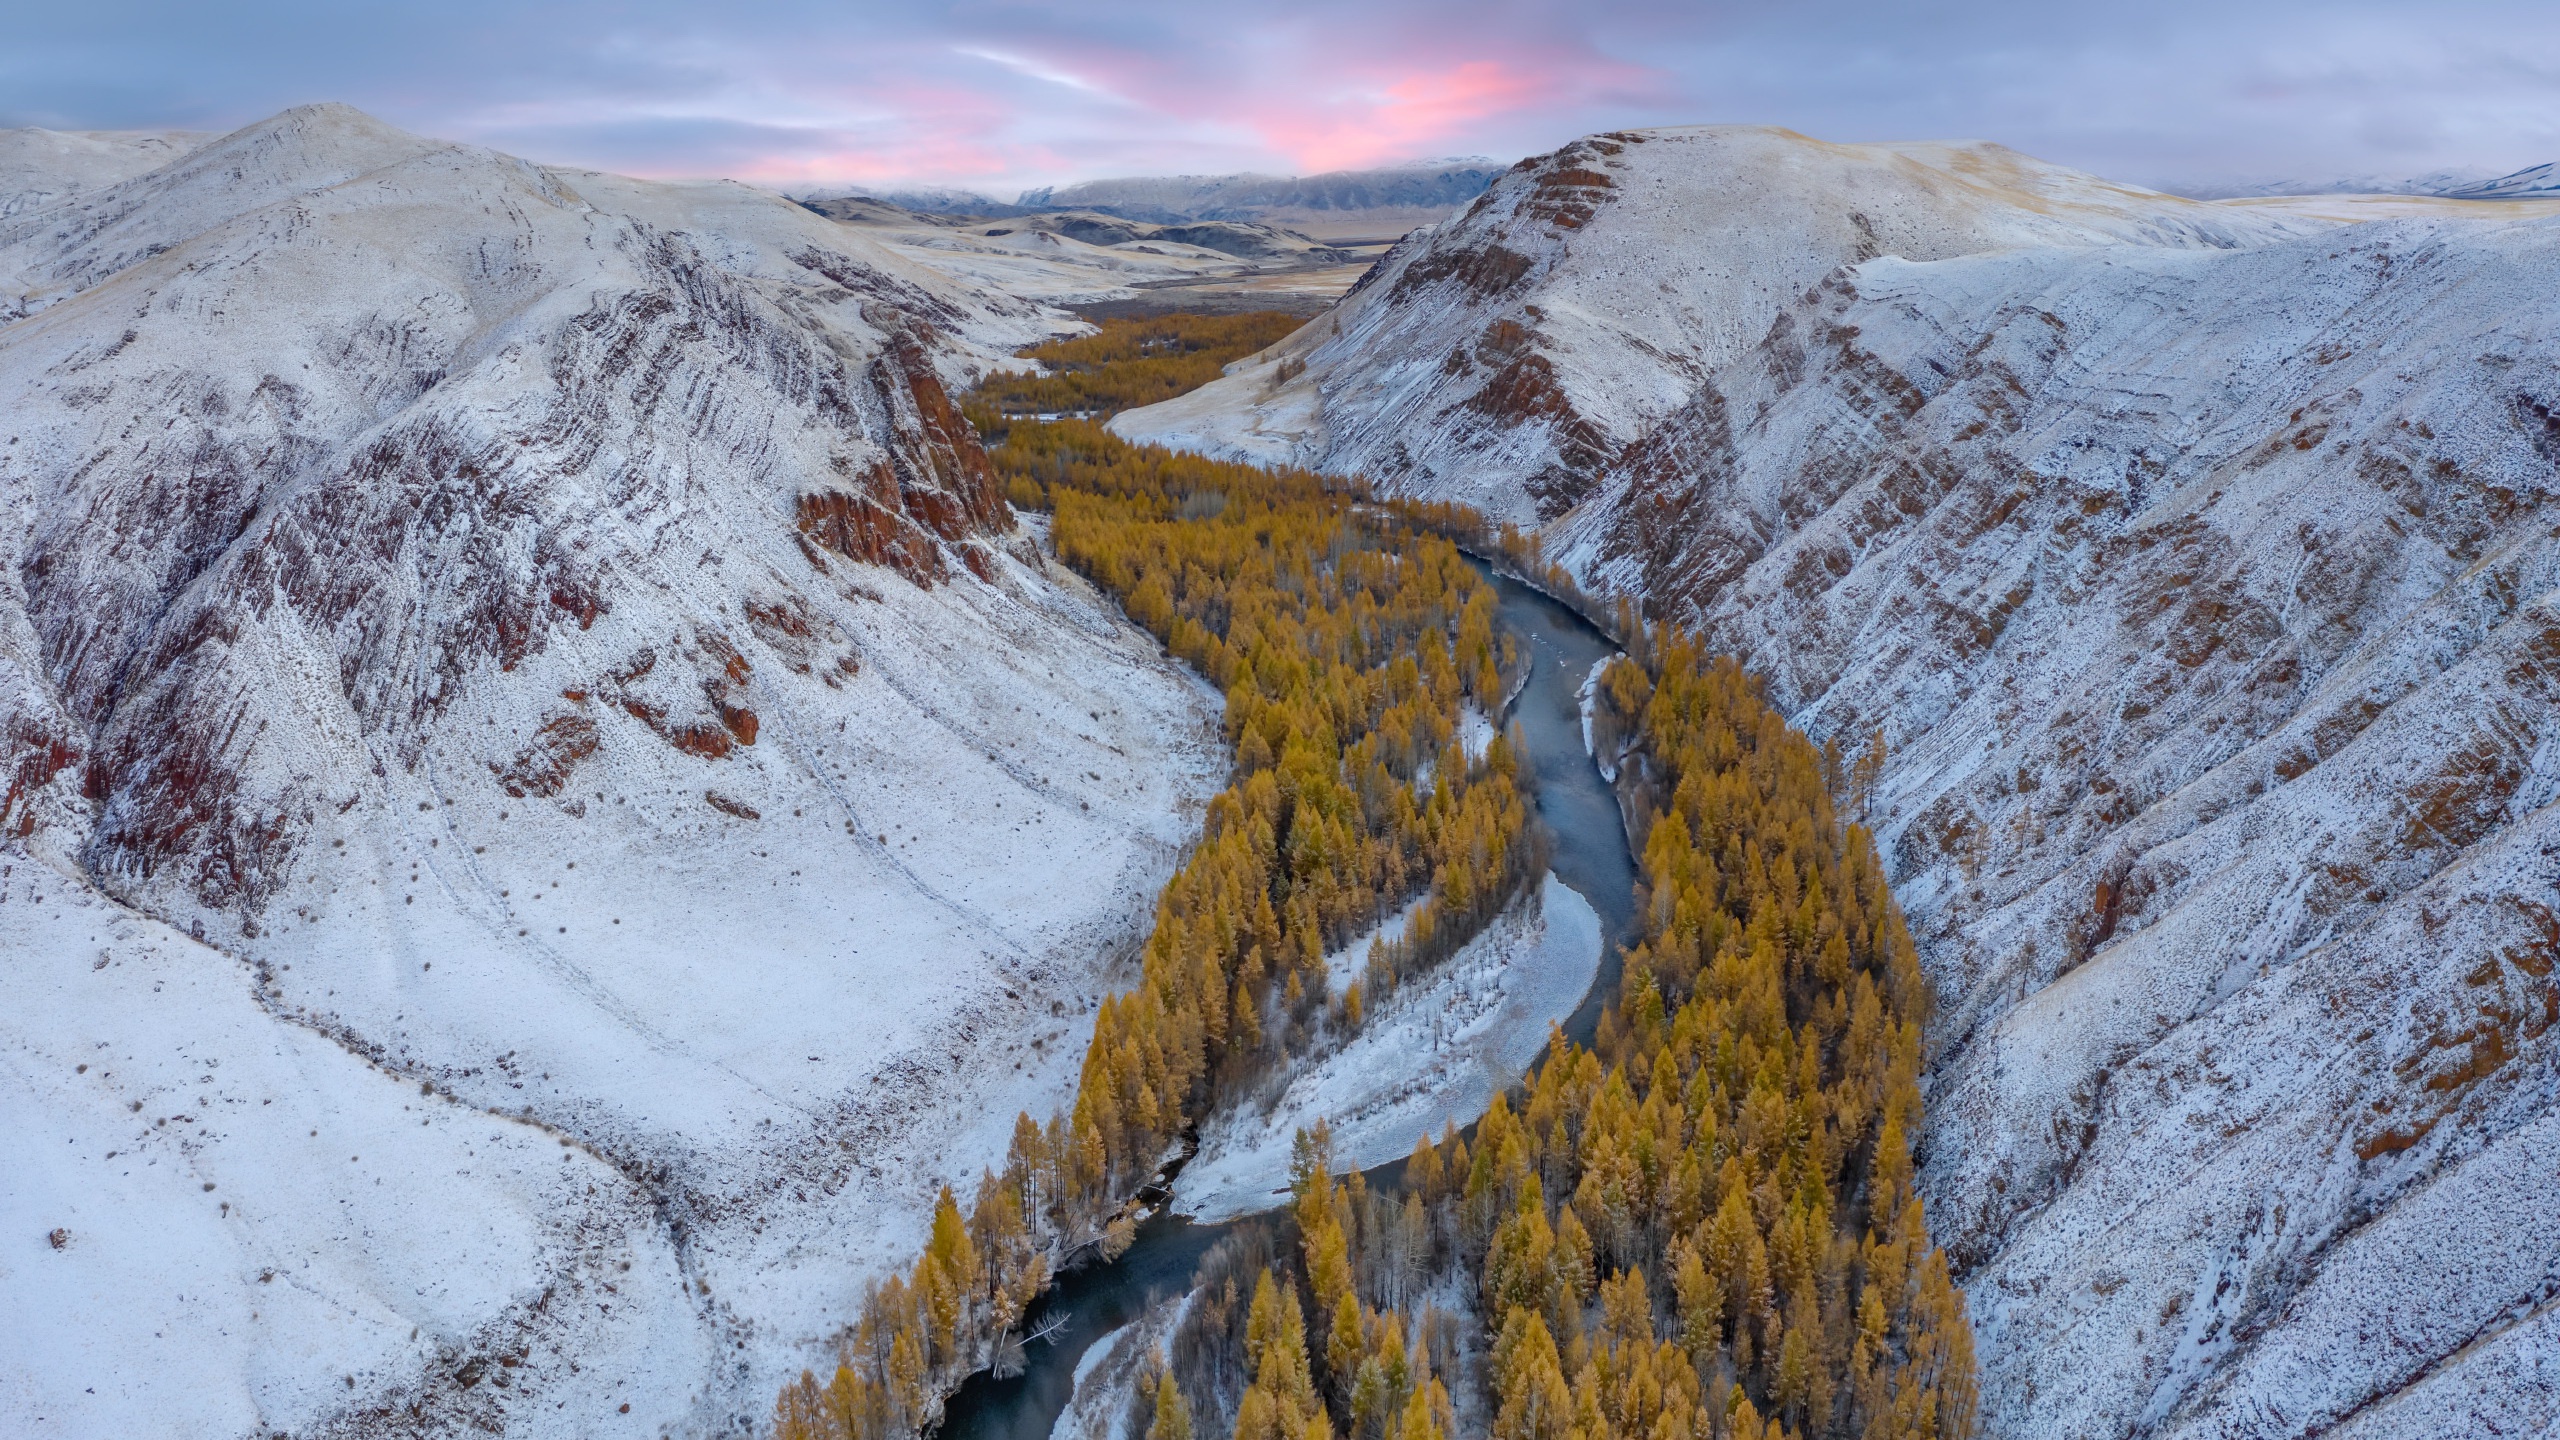 General 2560x1440 nature winter creeks cold ice snow mountains outdoors landscape Altai Mountains Mongolia aerial view